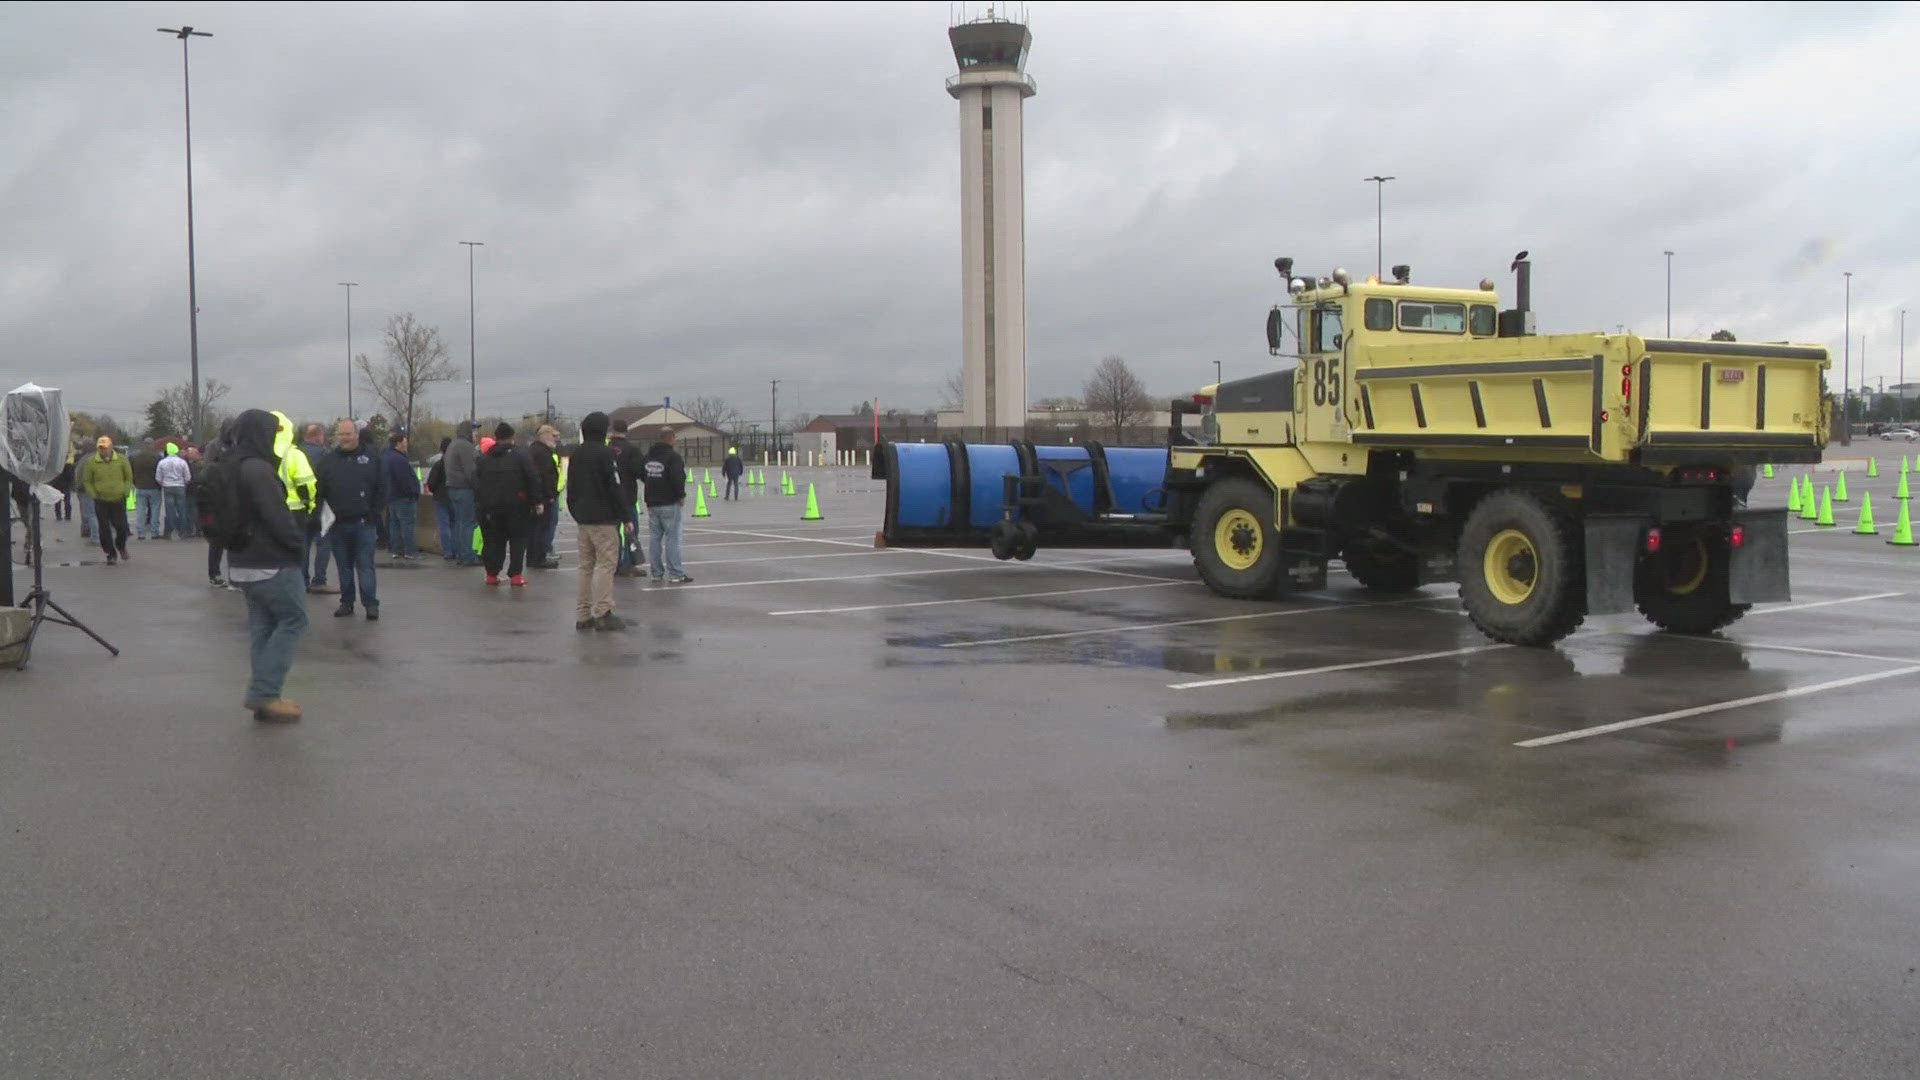 56th annual snow plow rodeo being held in Buffalo